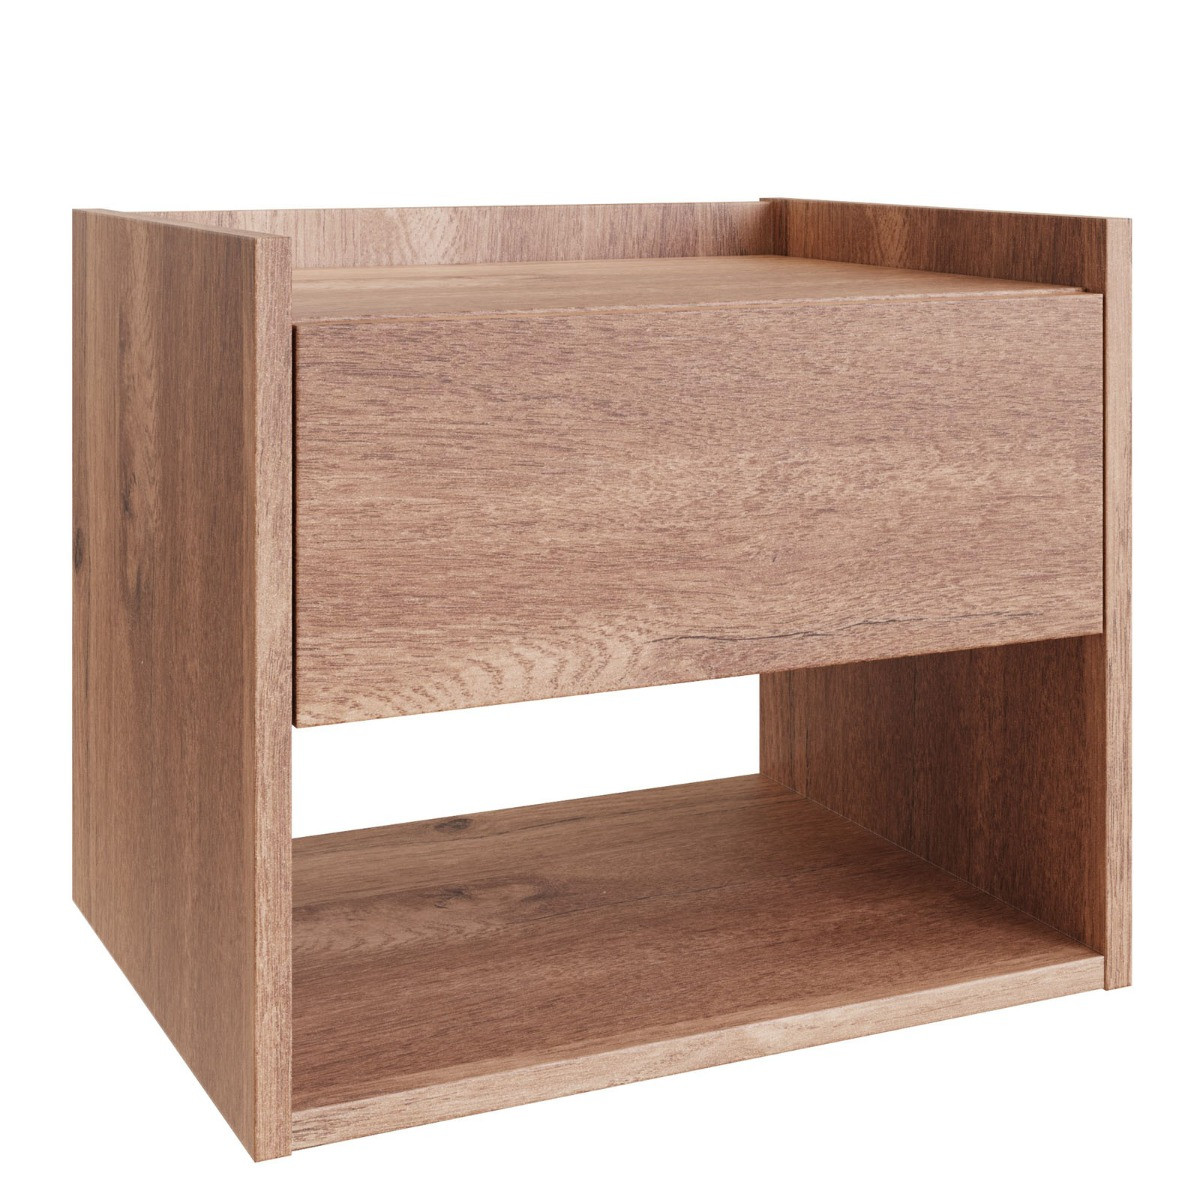 Harmony Pair Of Wall Mounted Bedside Tables - Oak>